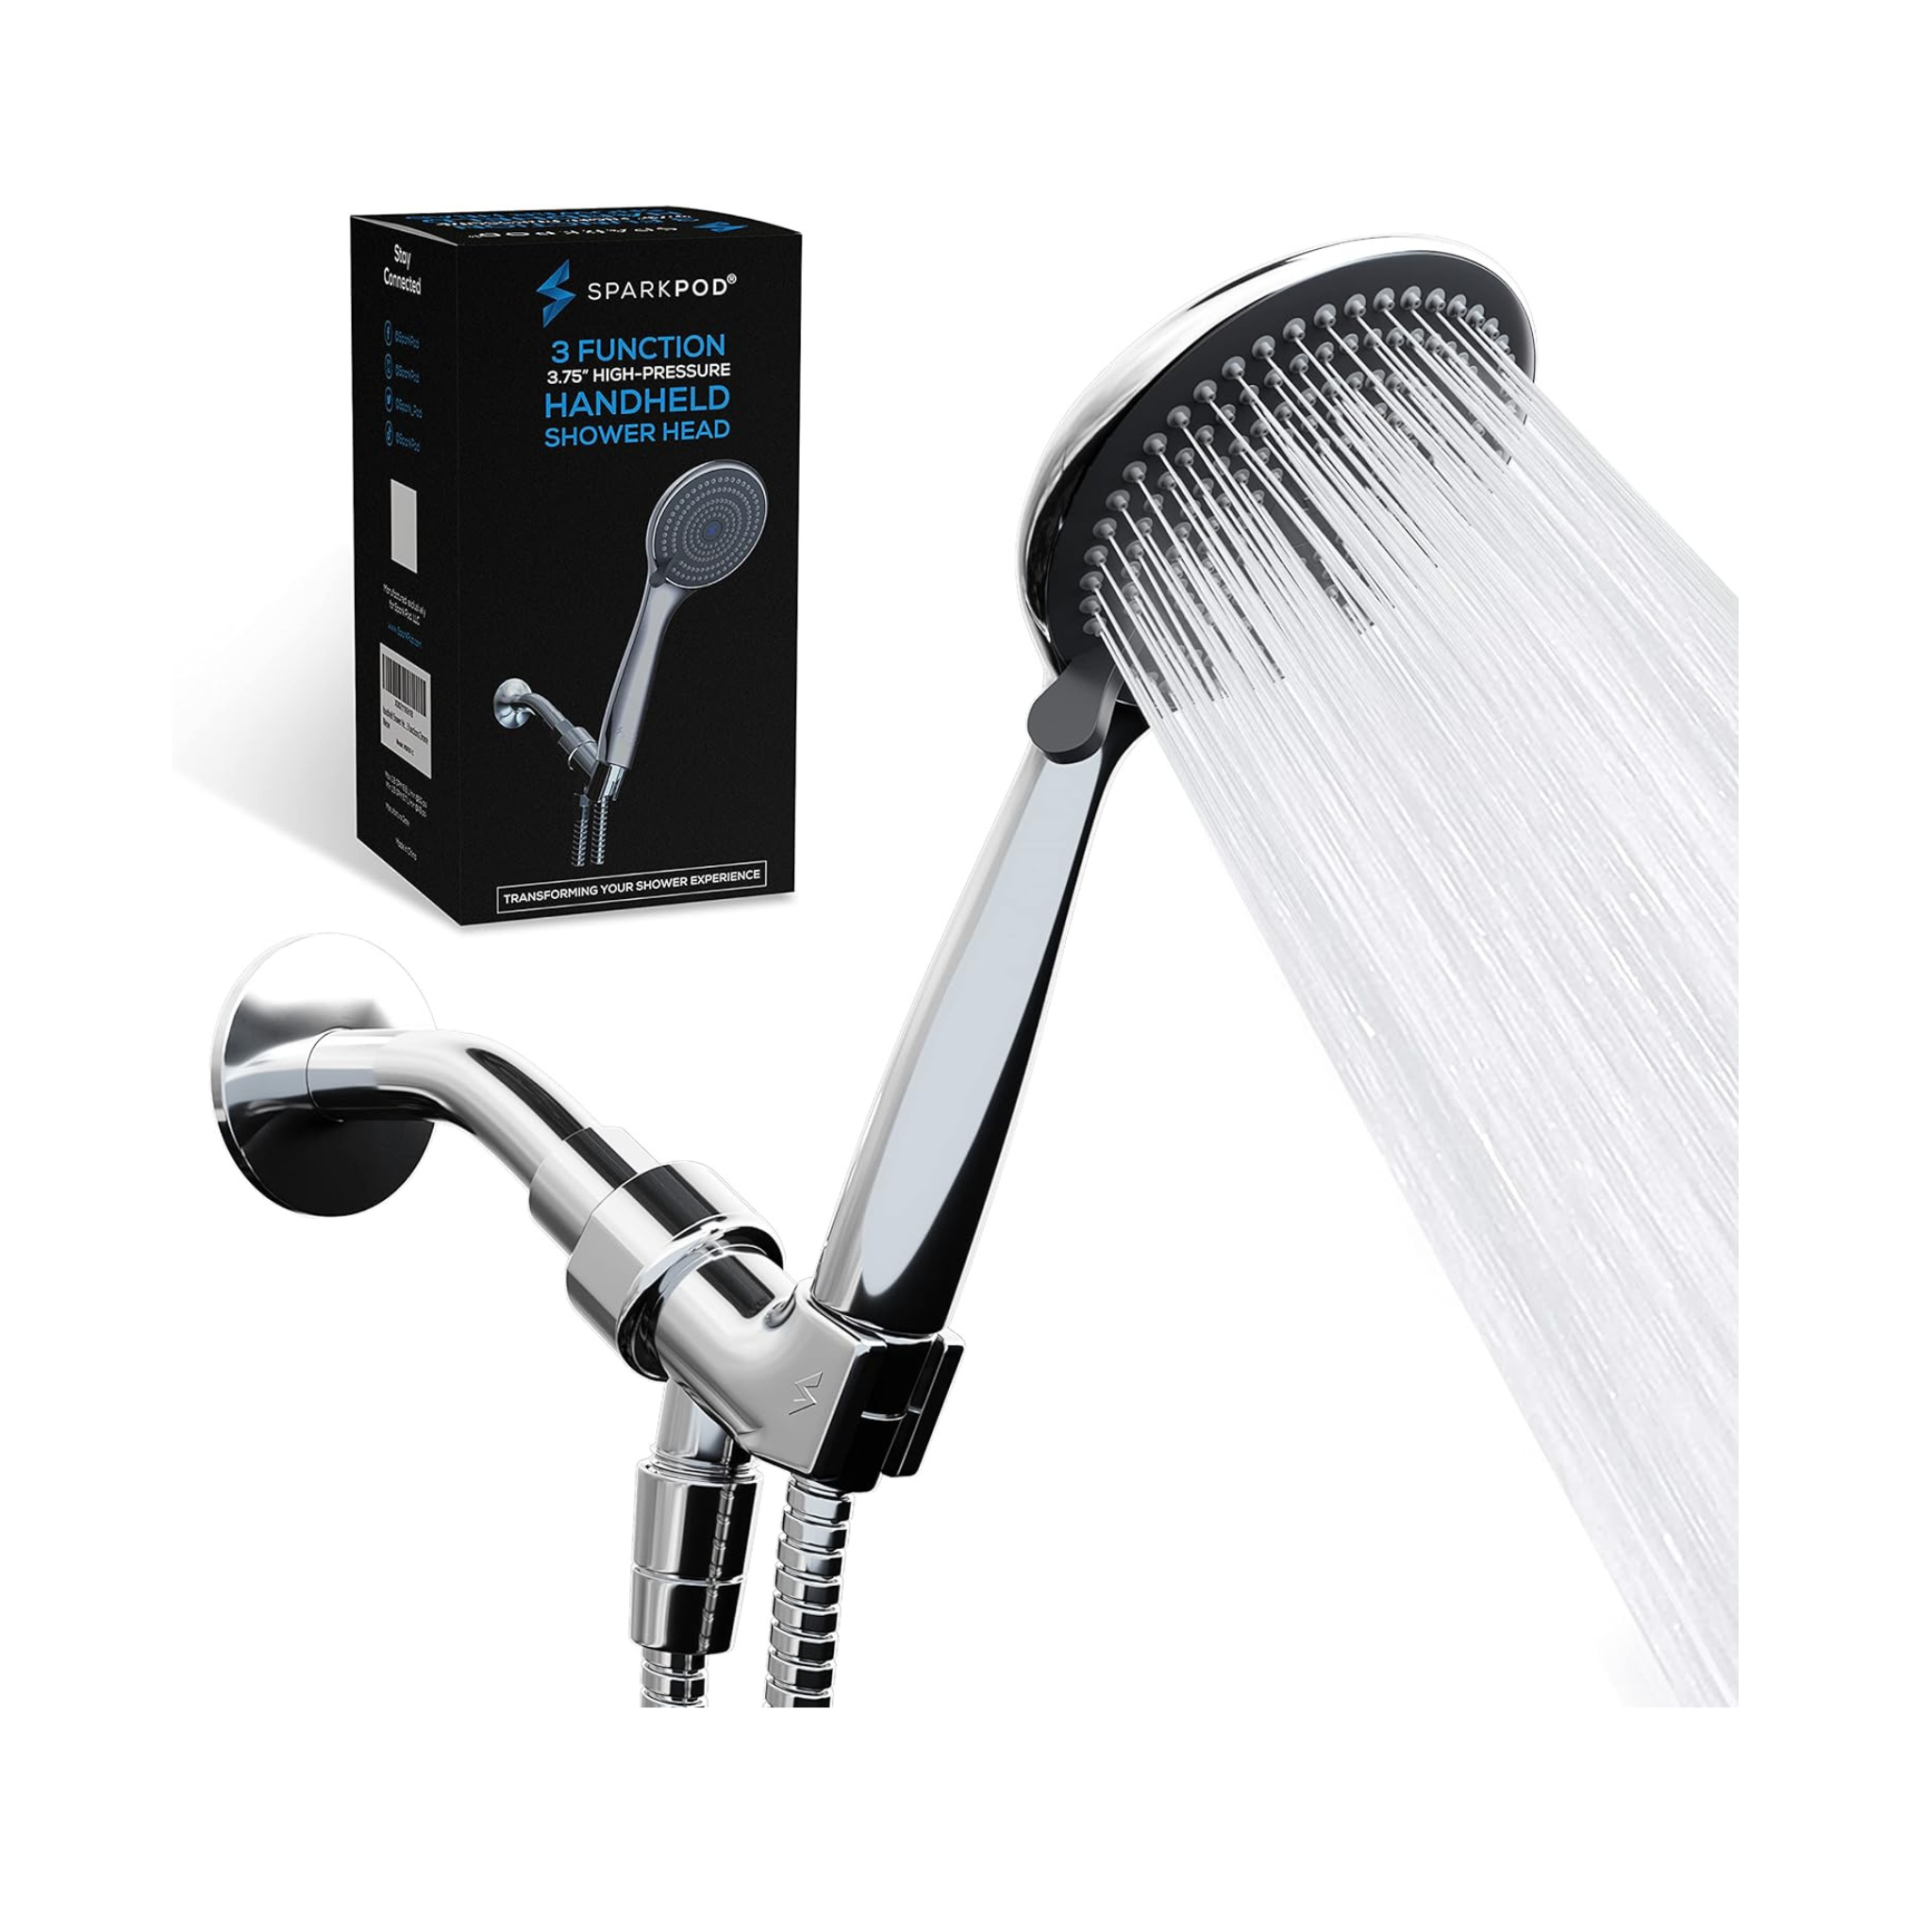 High Pressure 3-Function Handheld Shower Head with 5 ft. Hose and Bracket